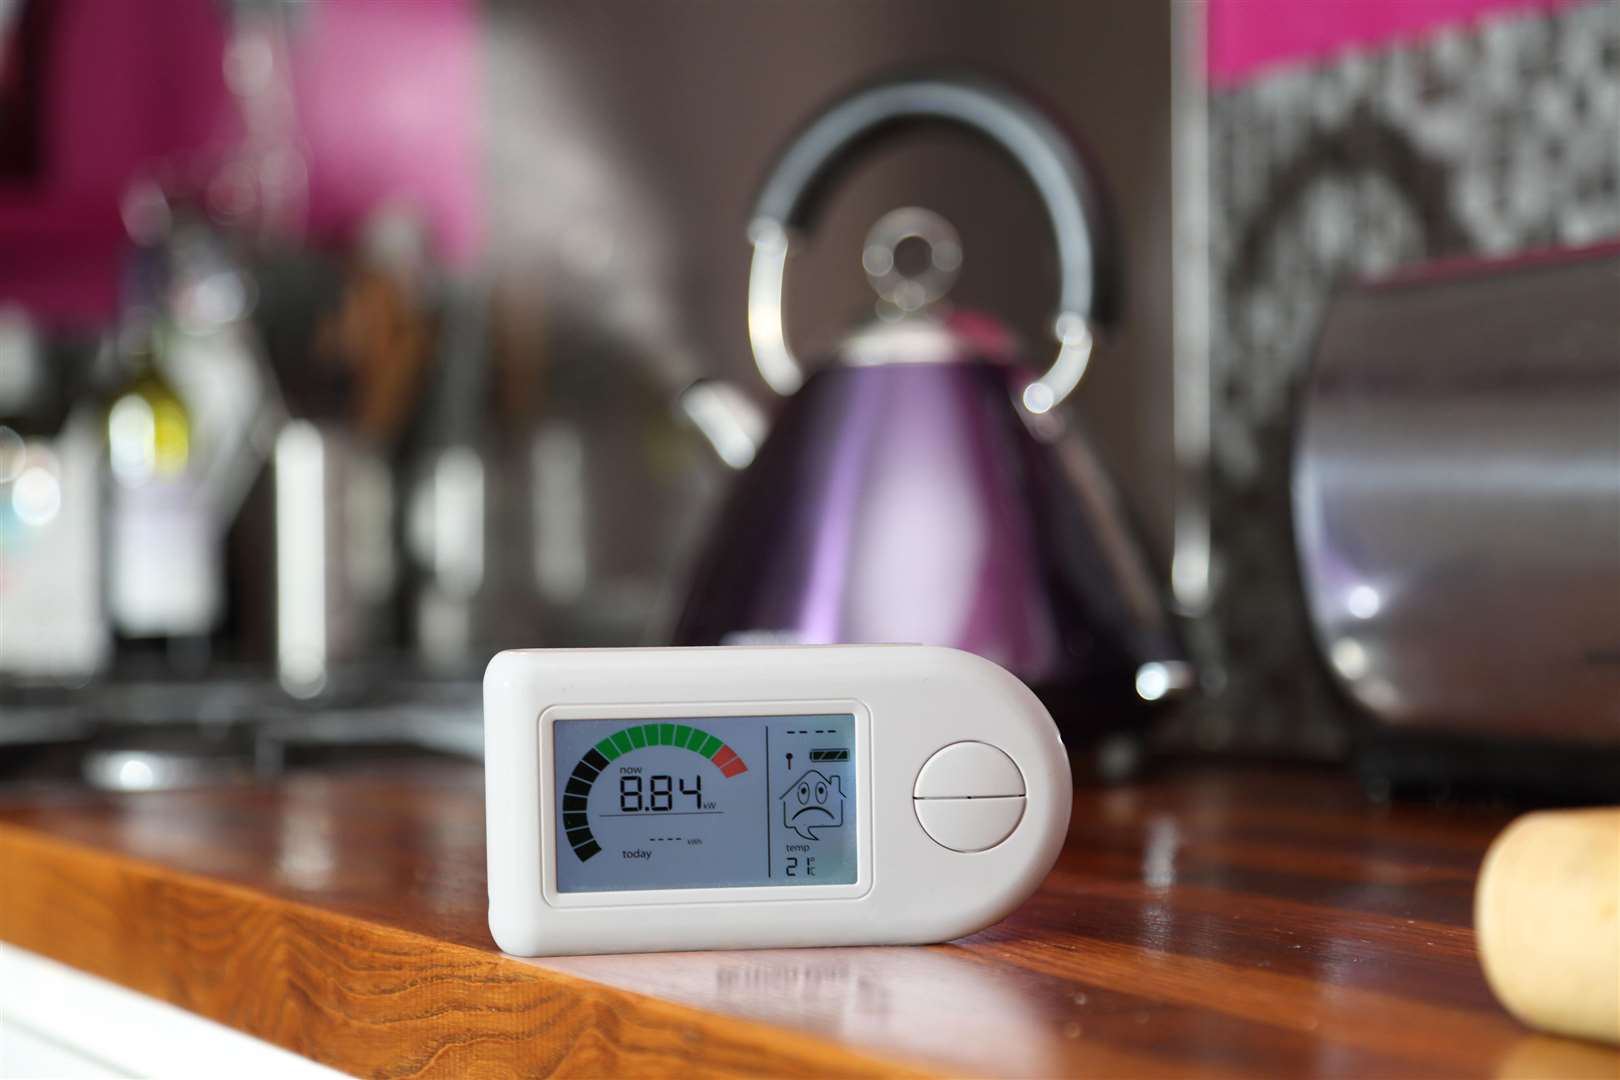 Smart metres will send regular meter readings to suppliers automatically